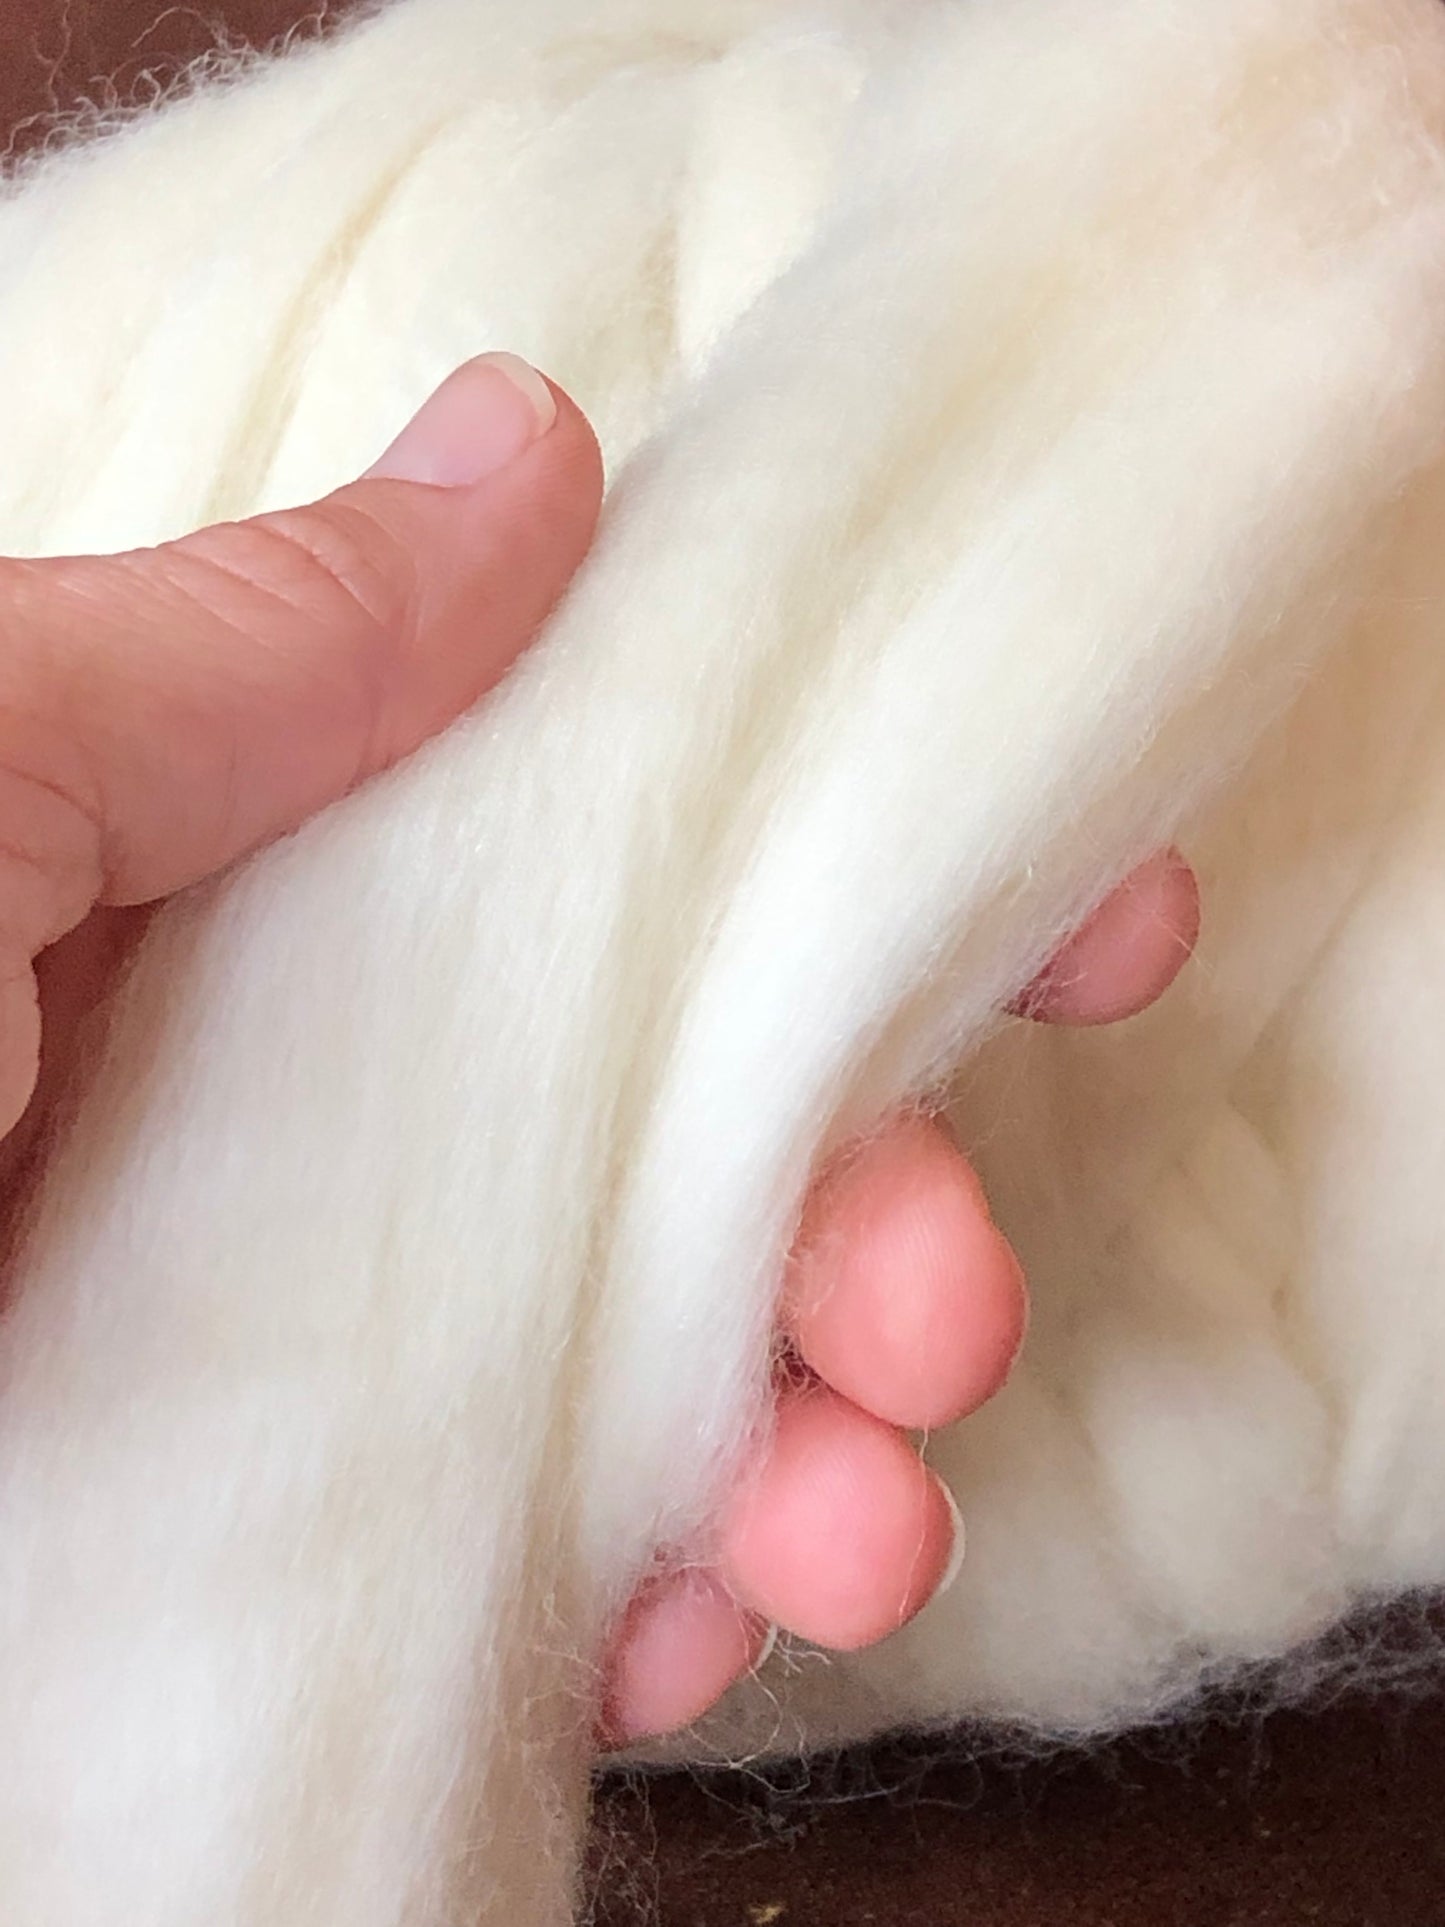 10 lbs Pounds White Wool Top DIY Roving Fiber Spinning, Make Your Own- Felting Crafts Large Chunky (Arm or PVC) Knit Throw Blanket USA -Sale